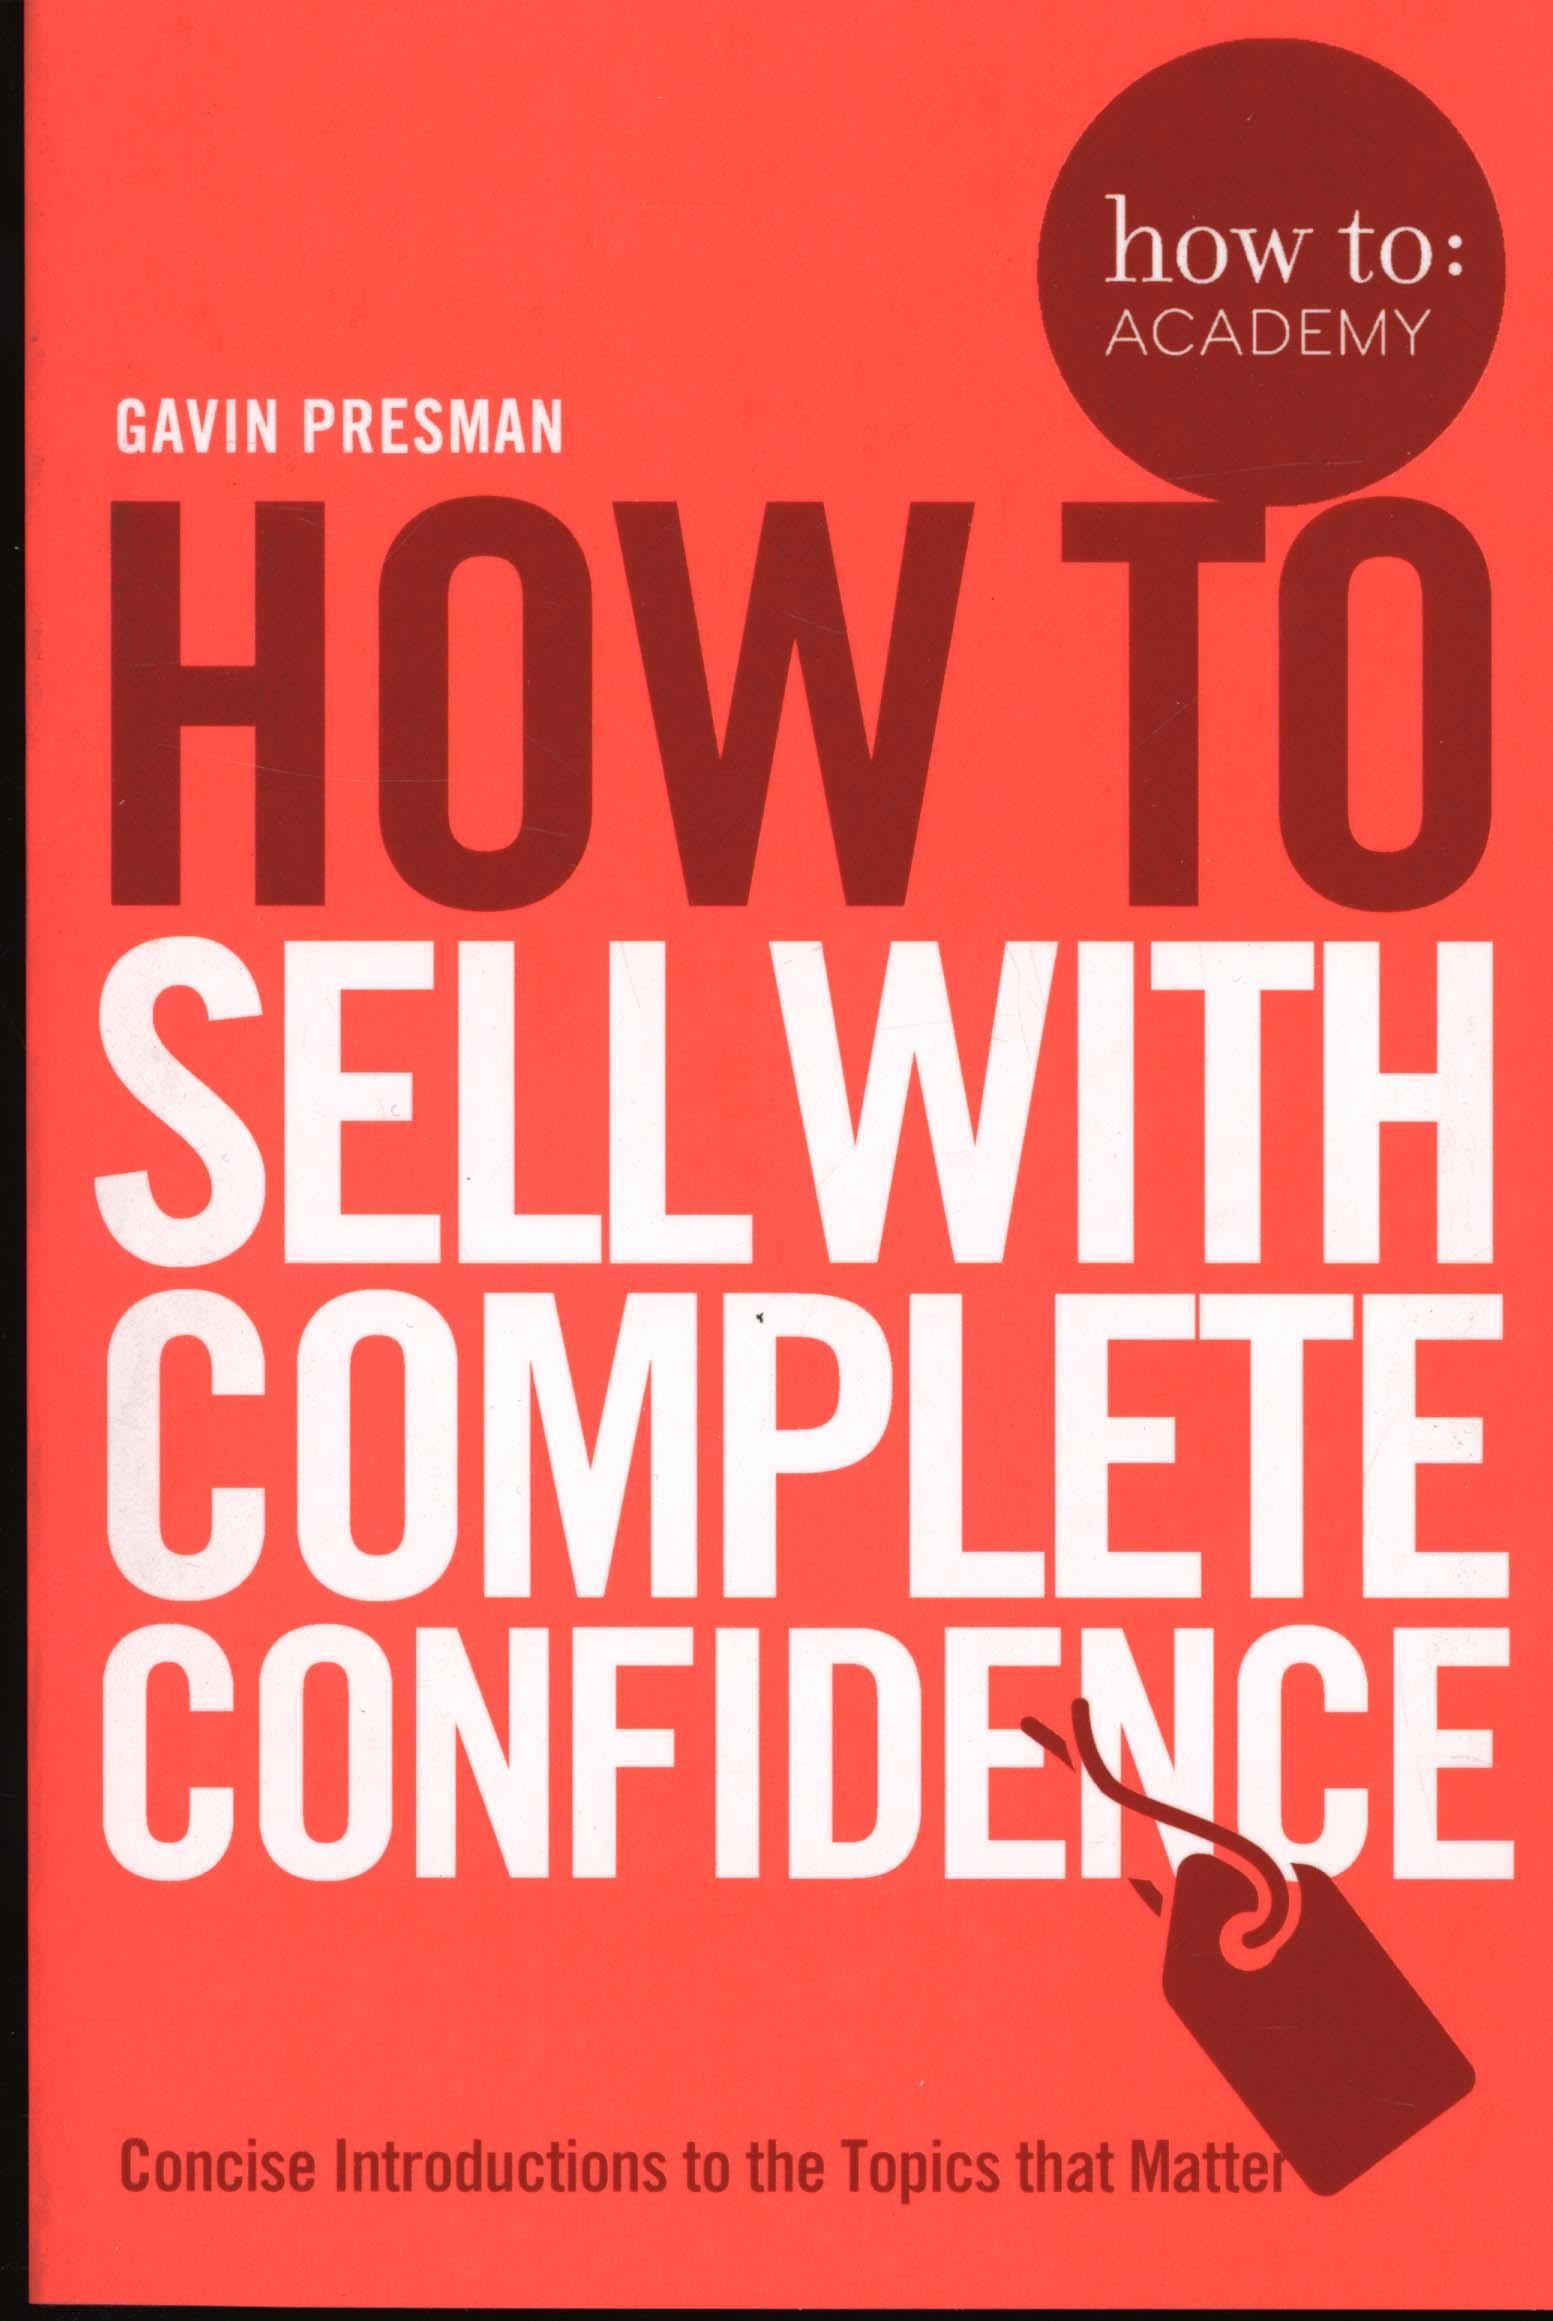 How To Sell With Complete Confidence